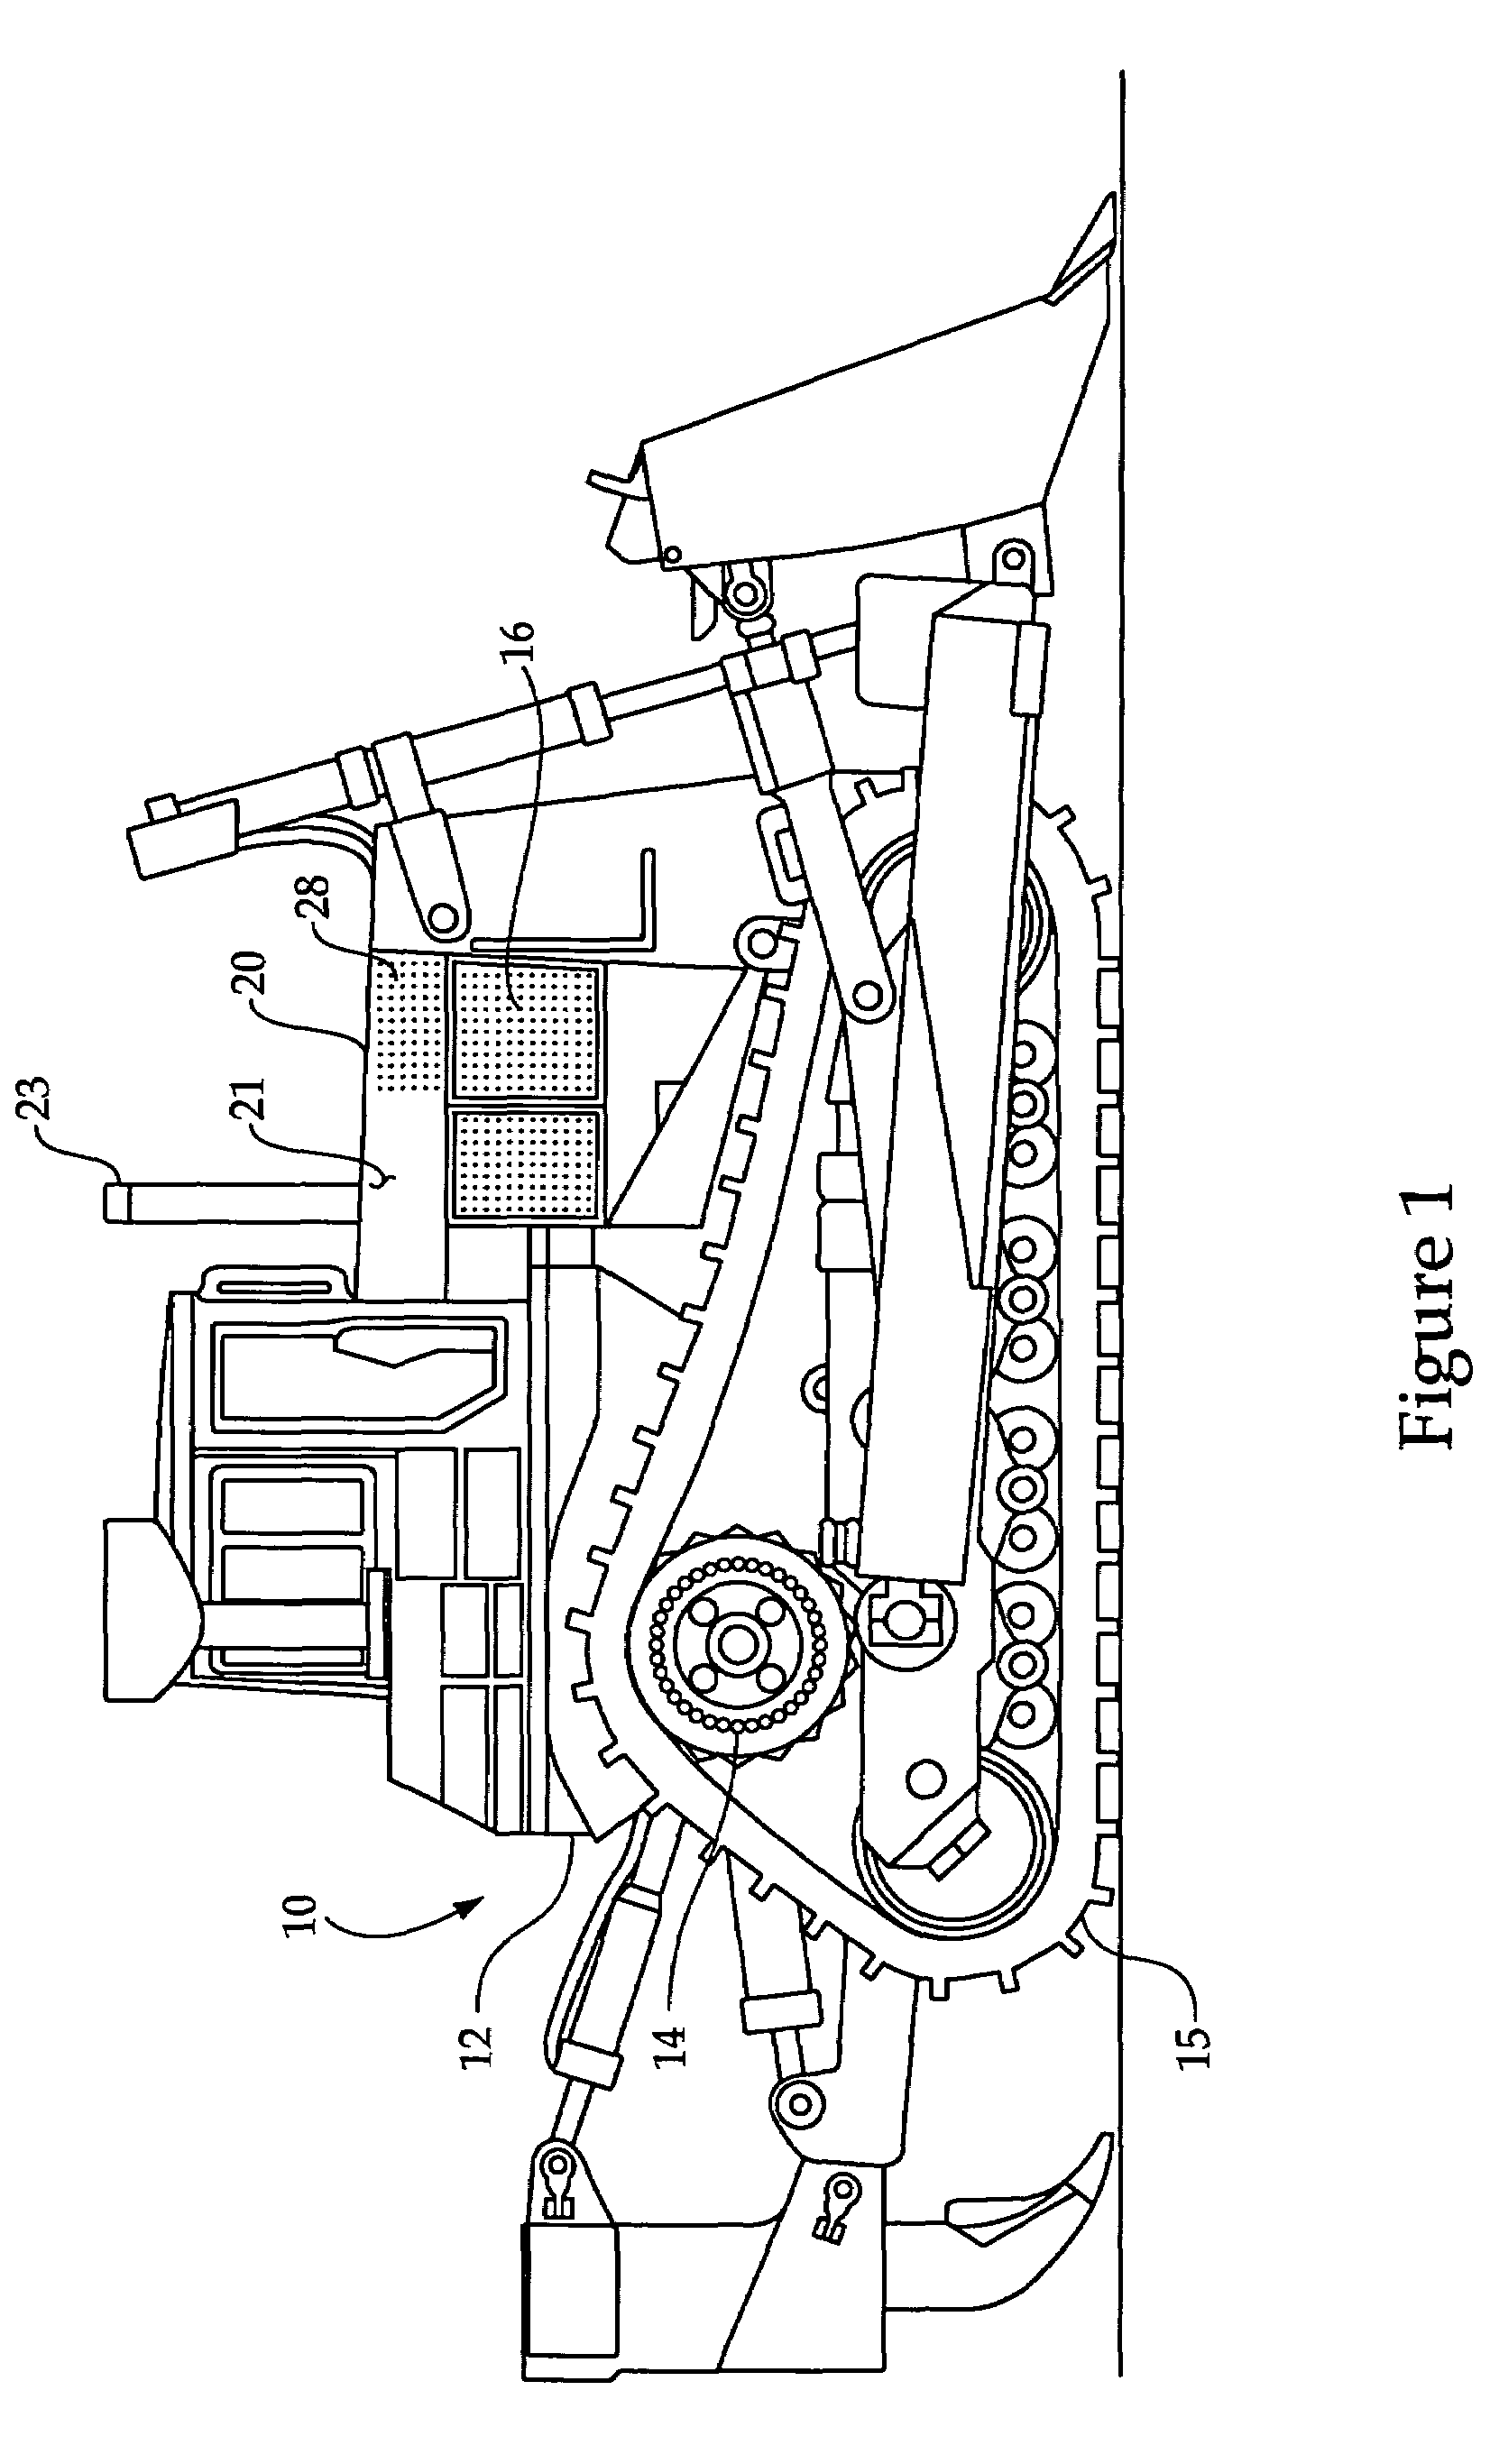 Engine hood assembly enclosure with exhaust aftertreatment device integrated therein, and machine using same